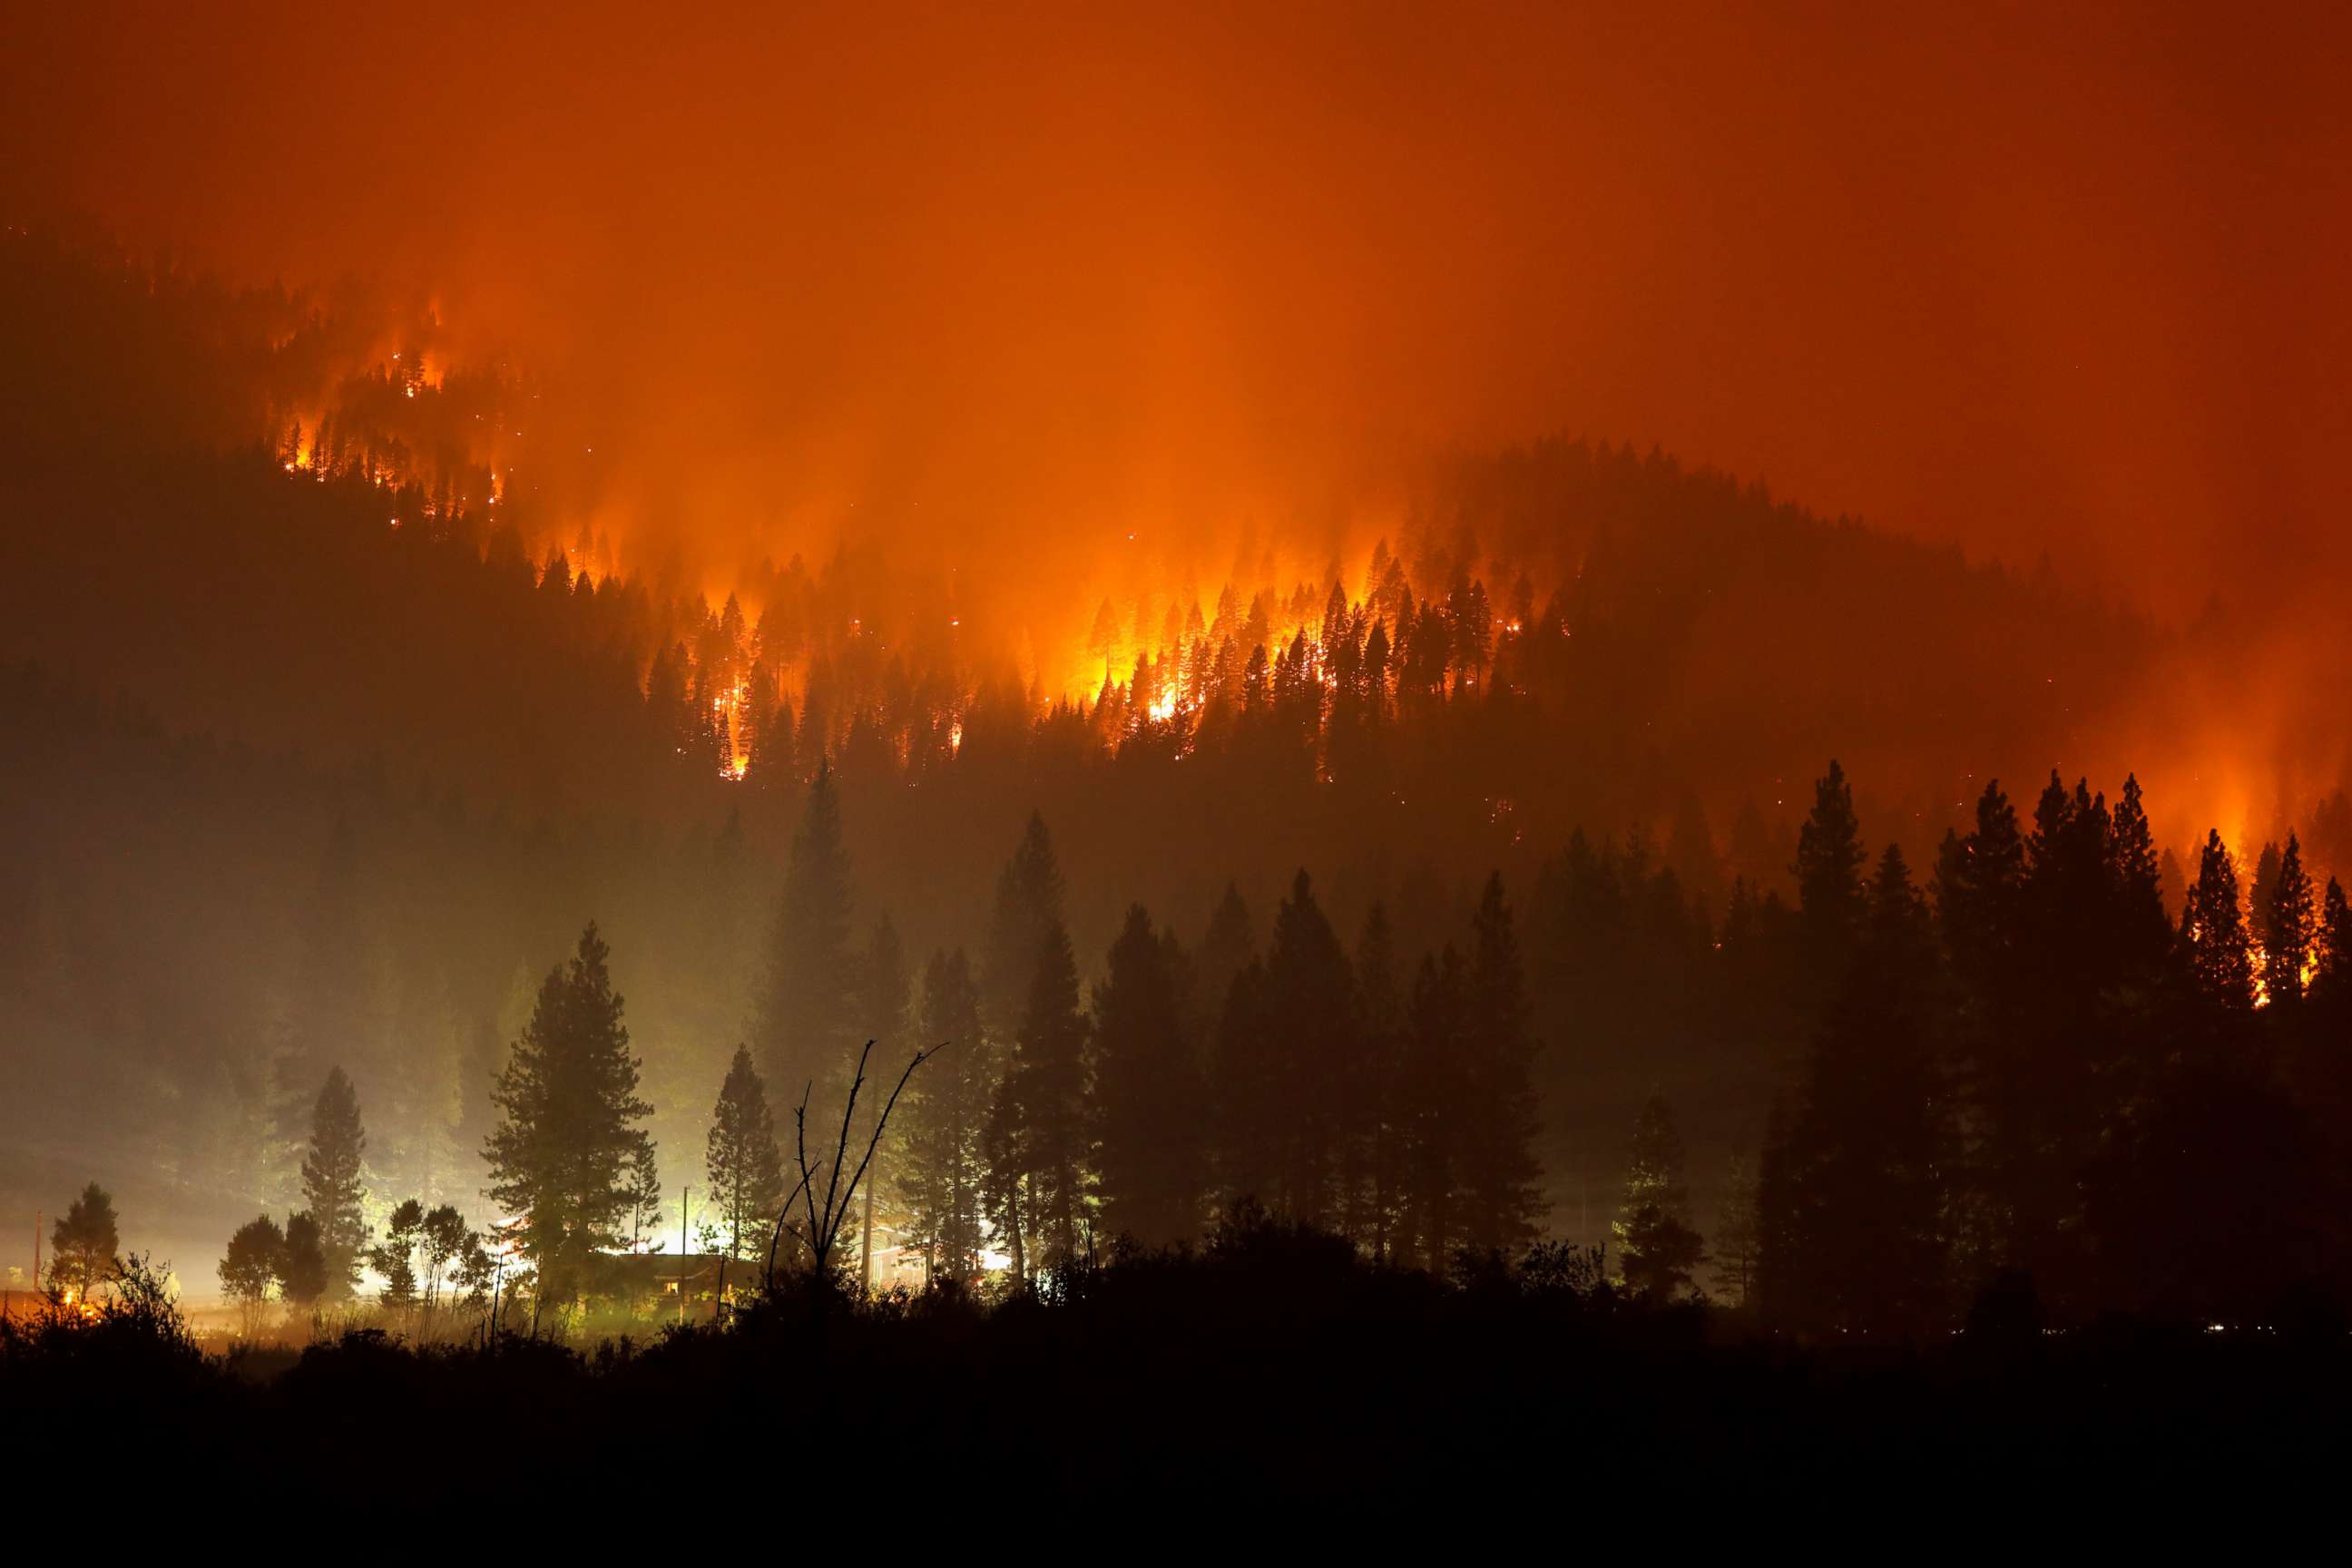 PHOTO: The Dixie Fire burns at night in Taylorsville, Calif., July 27, 2021.